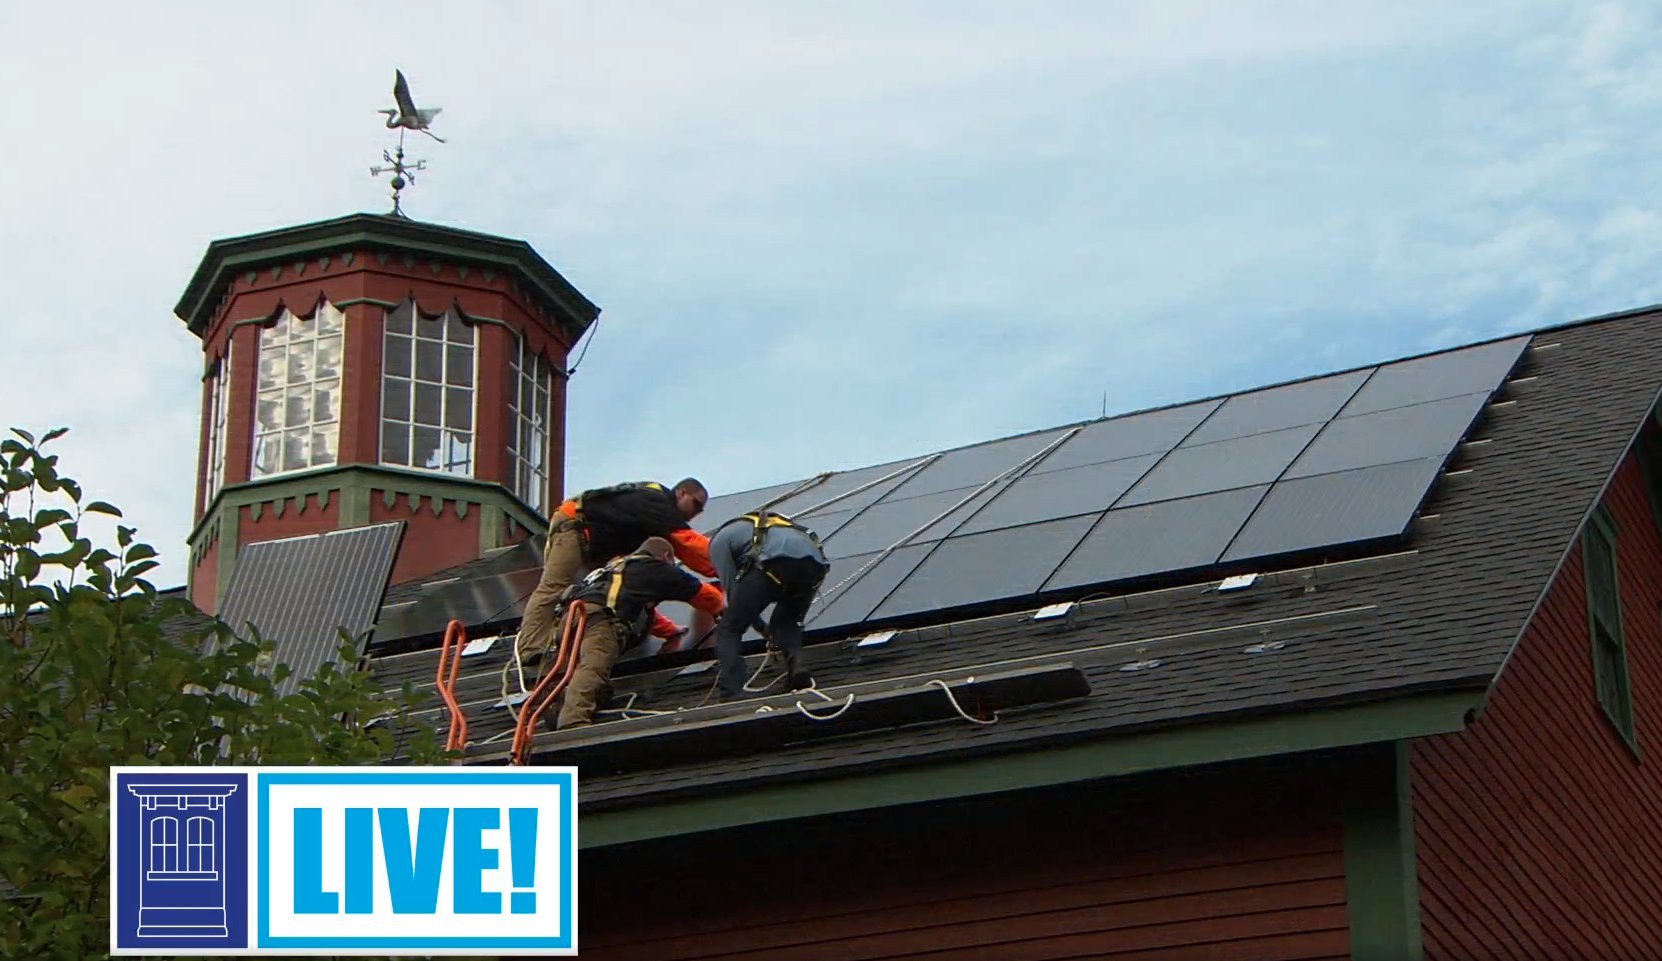 Installing solar panels on a roof